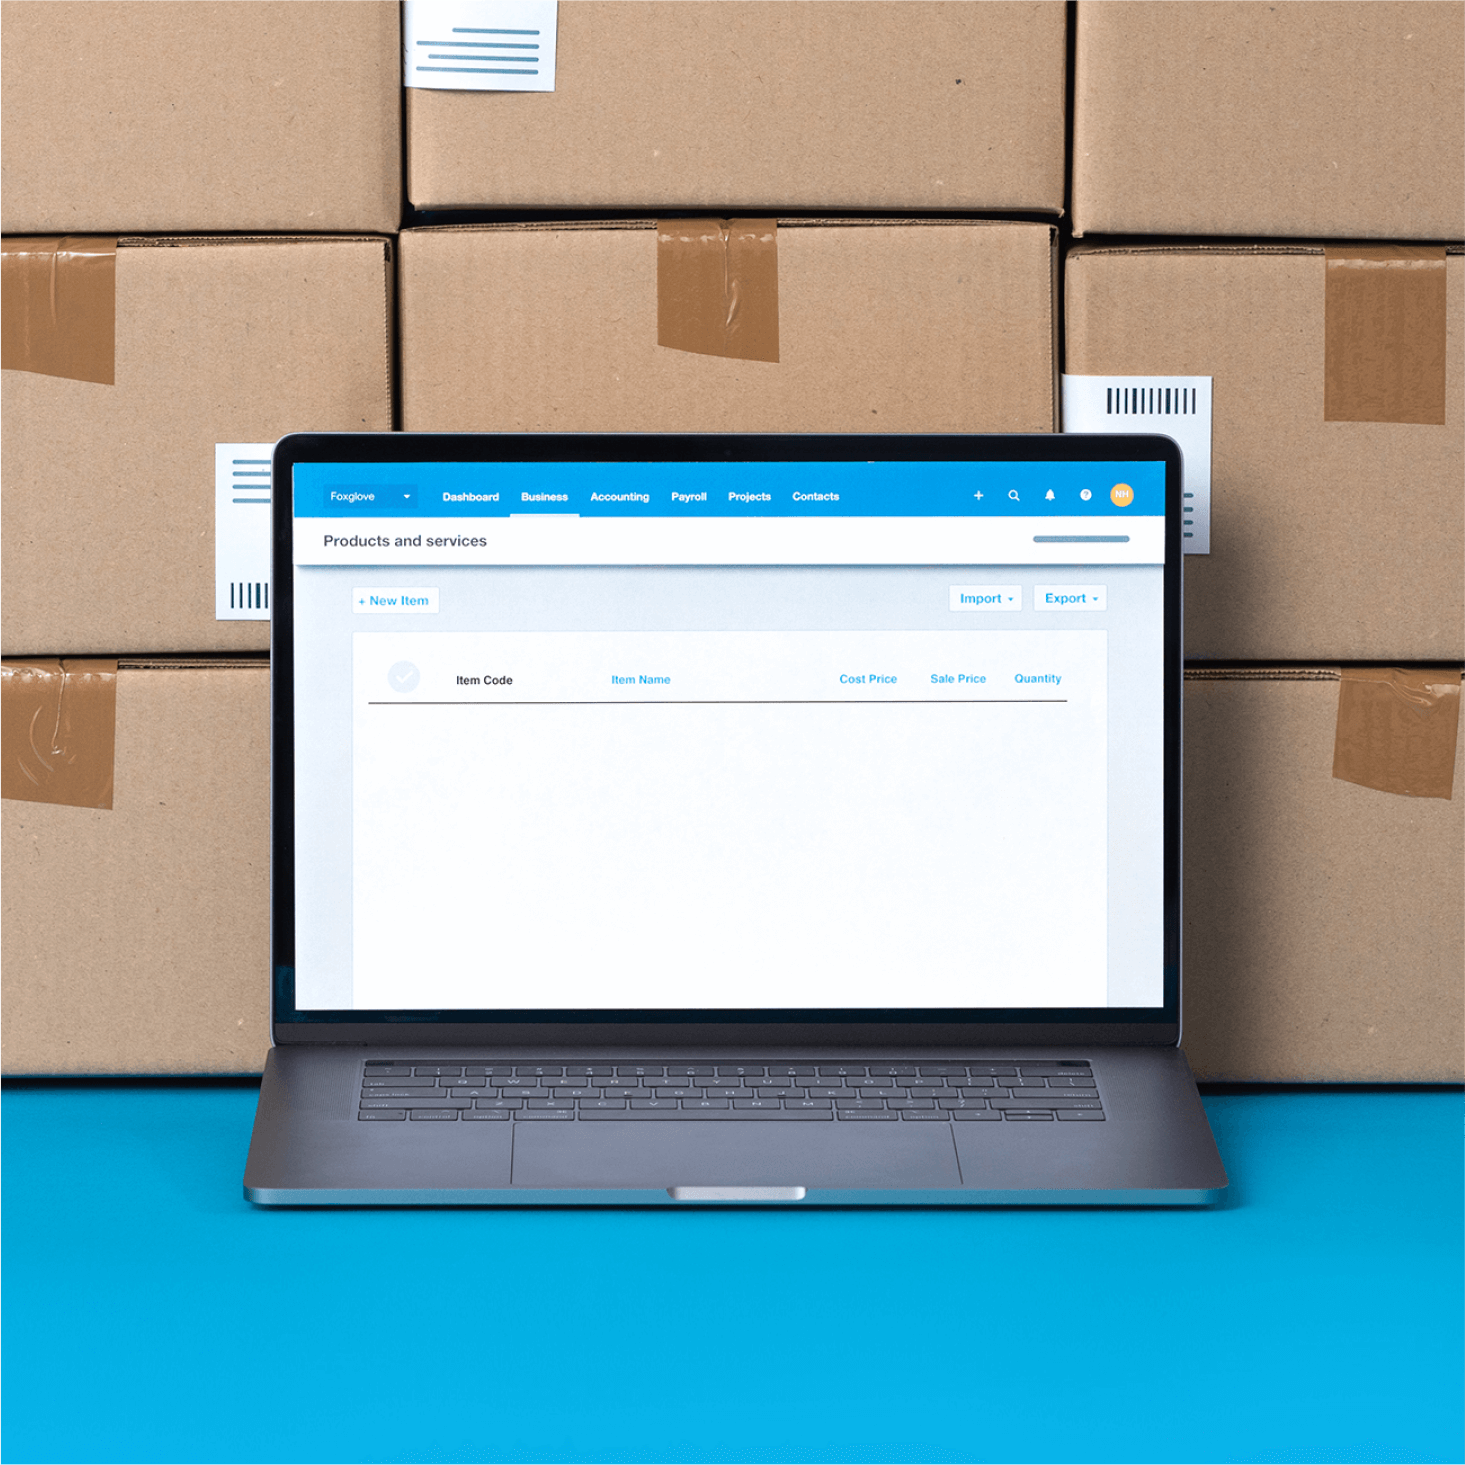 Unopened boxes containing new stock are stacked near a laptop that displays an inventory app.